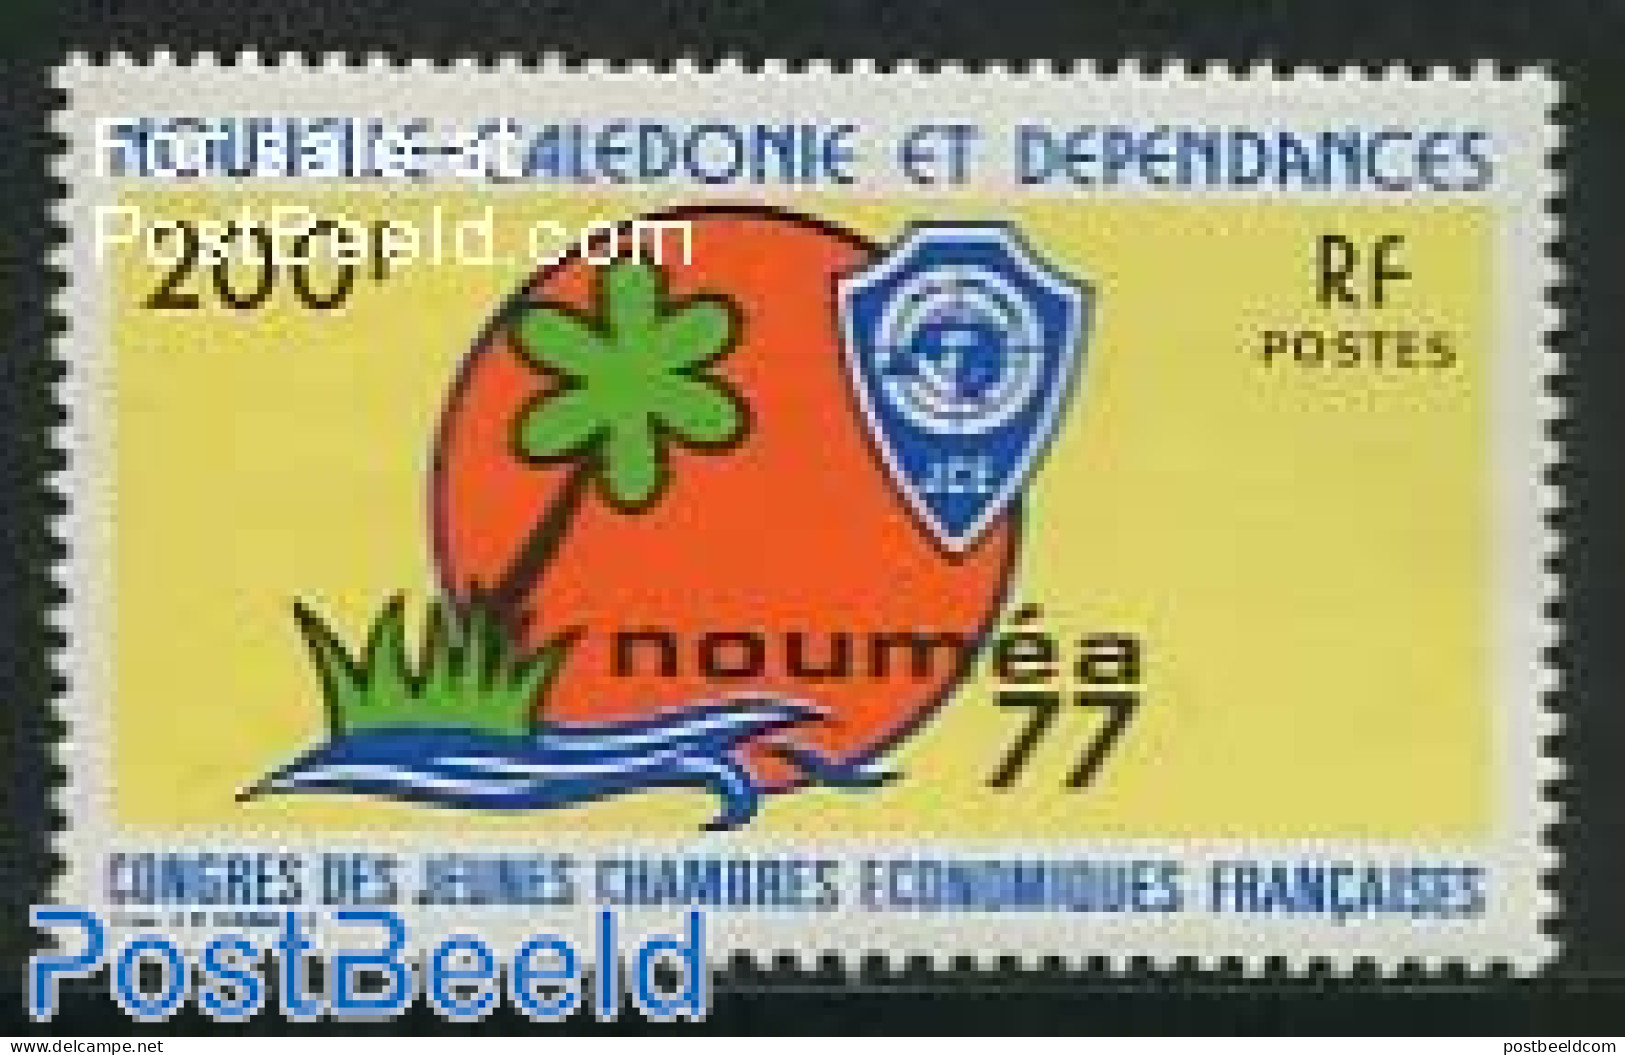 New Caledonia 1977 Junior Chamber Of Commerce 1v, Mint NH, Various - Export & Trade - Neufs